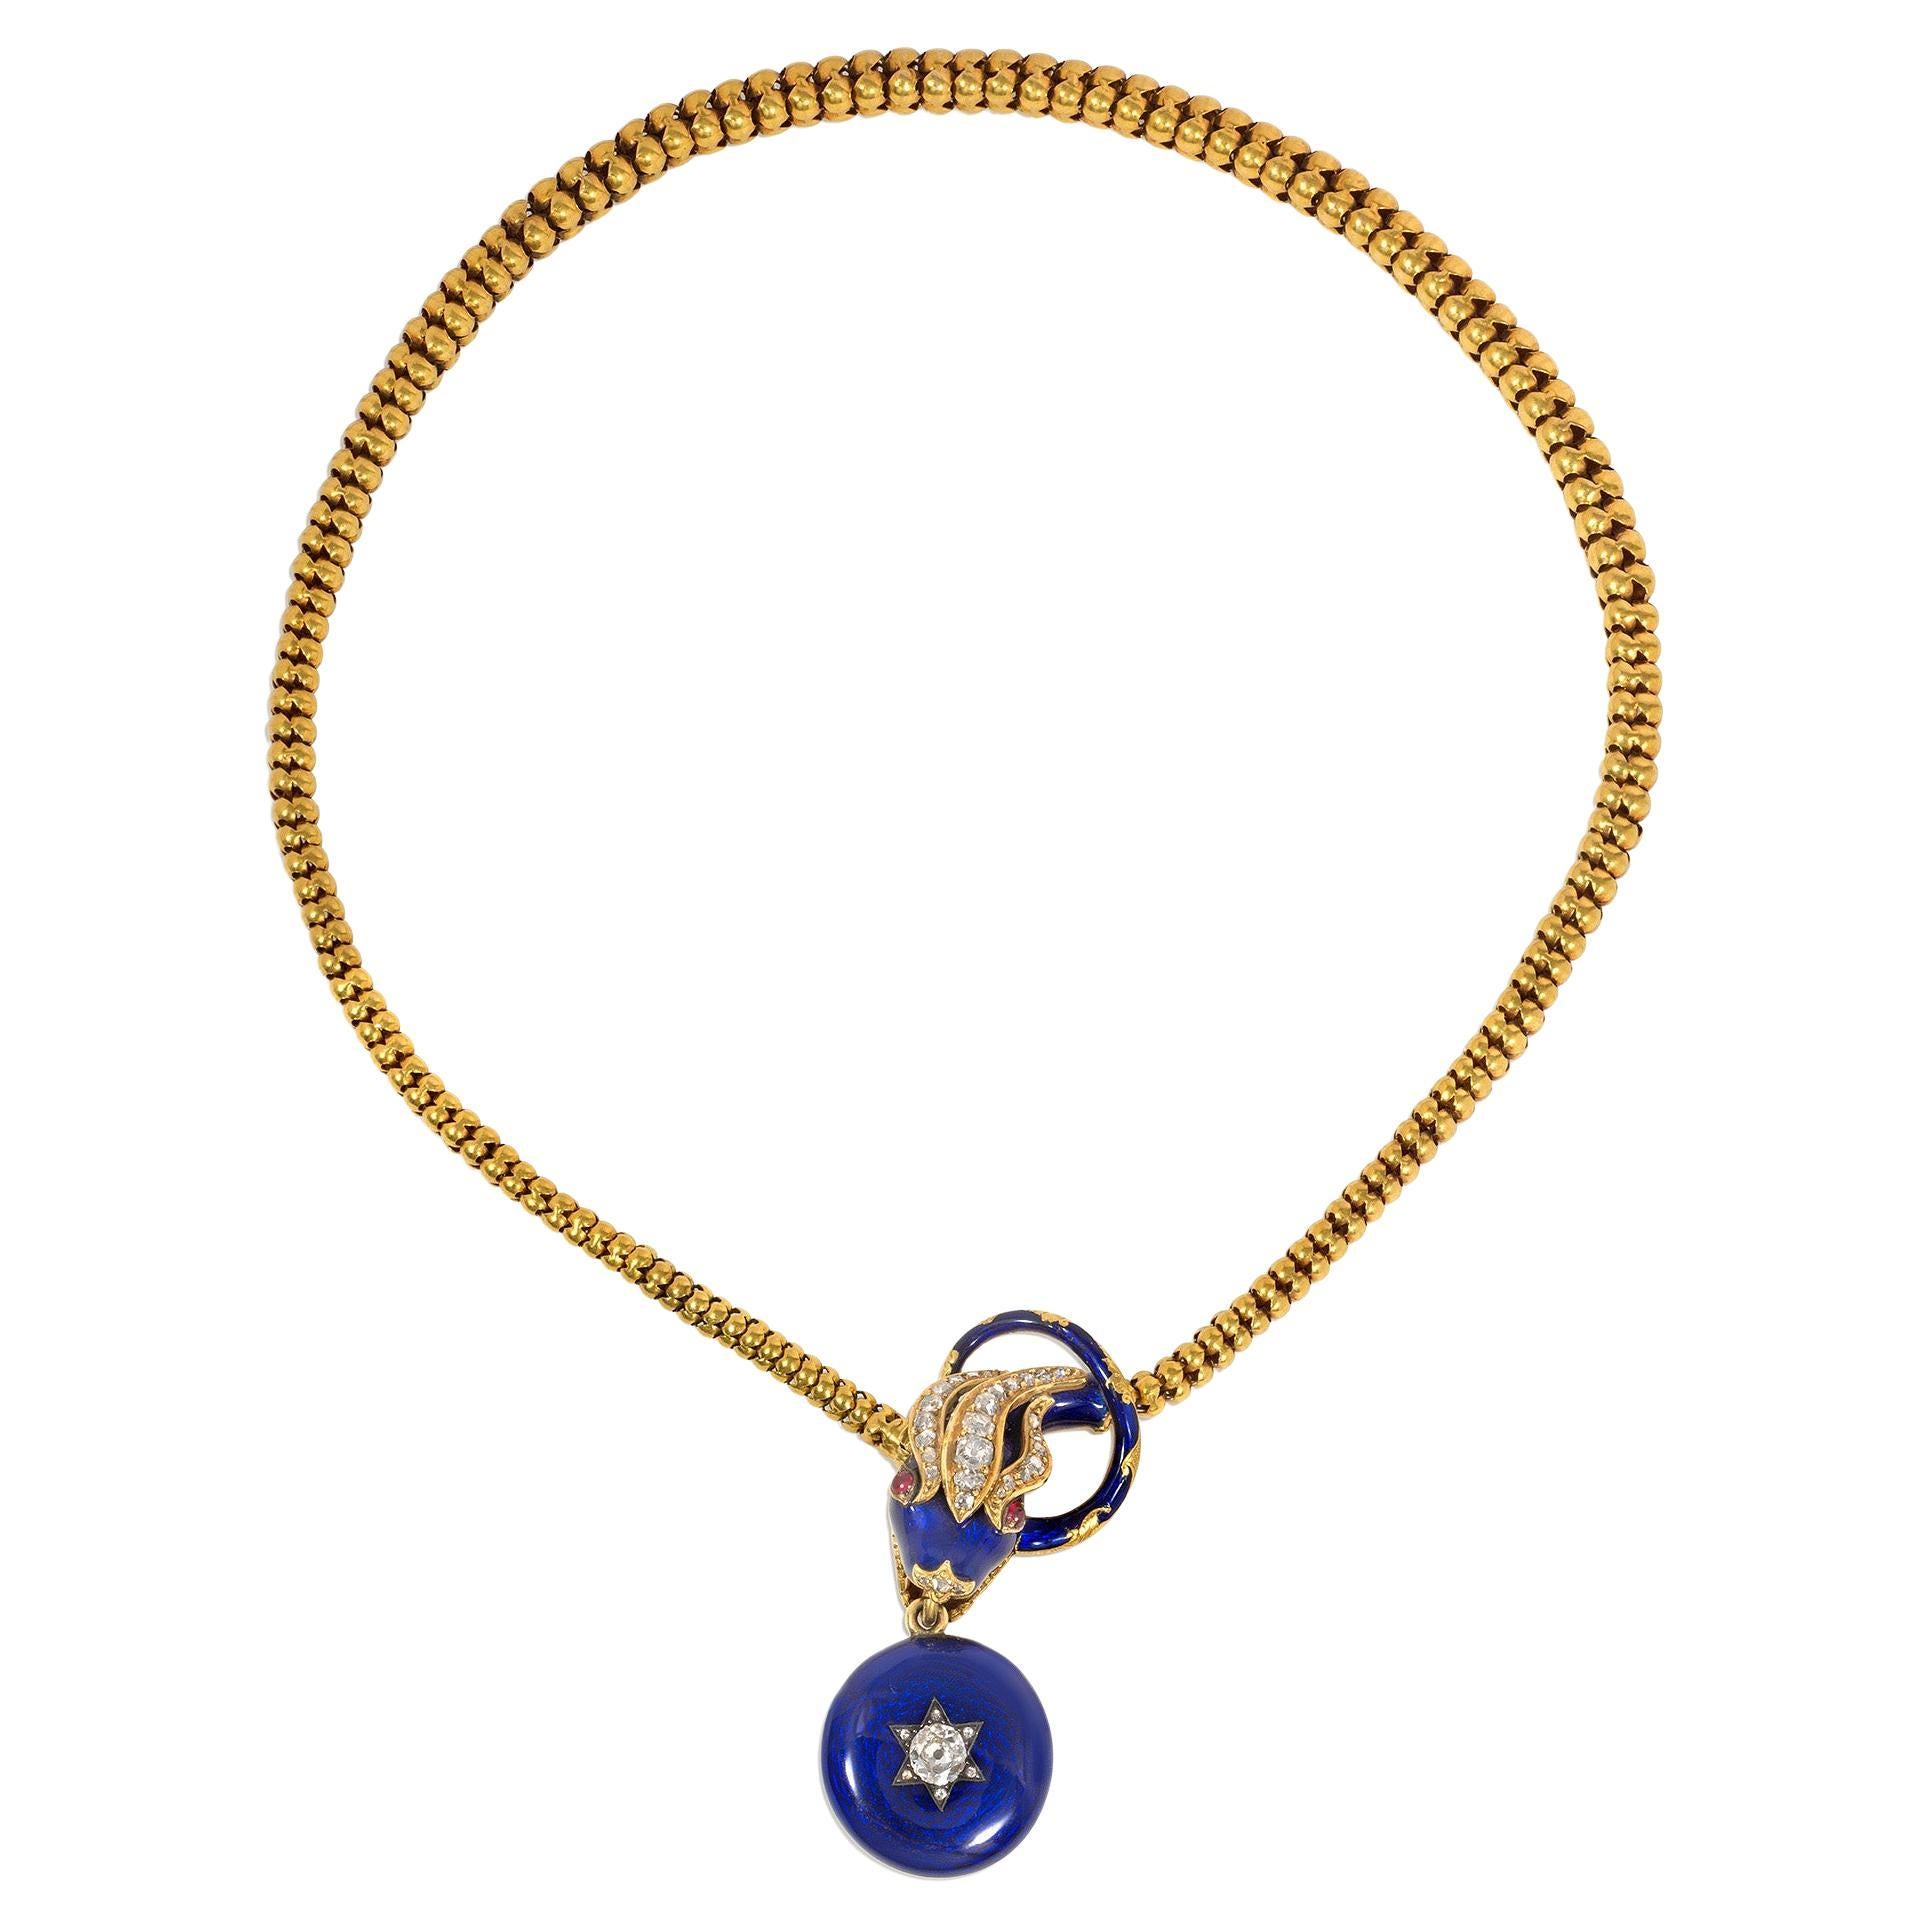 Antique Victorian Gold, Blue Enamel, and Gemstone Snake Necklace with Locket For Sale